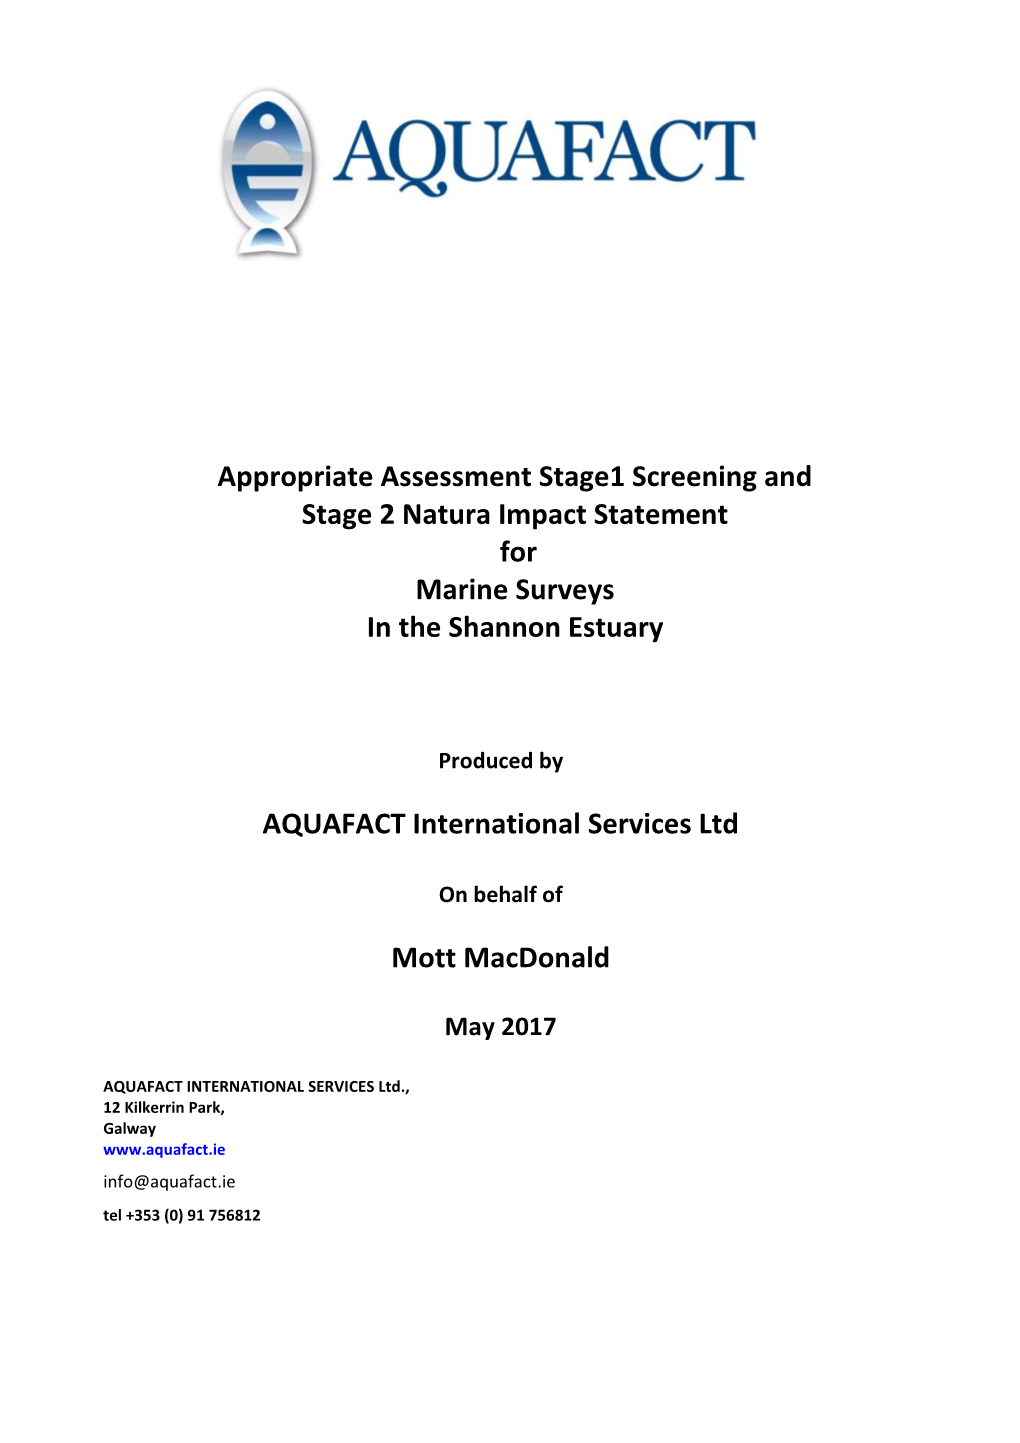 Appropriate Assessment Stage1 Screening and Stage 2 Natura Impact Statement for Marine Surveys in the Shannon Estuary